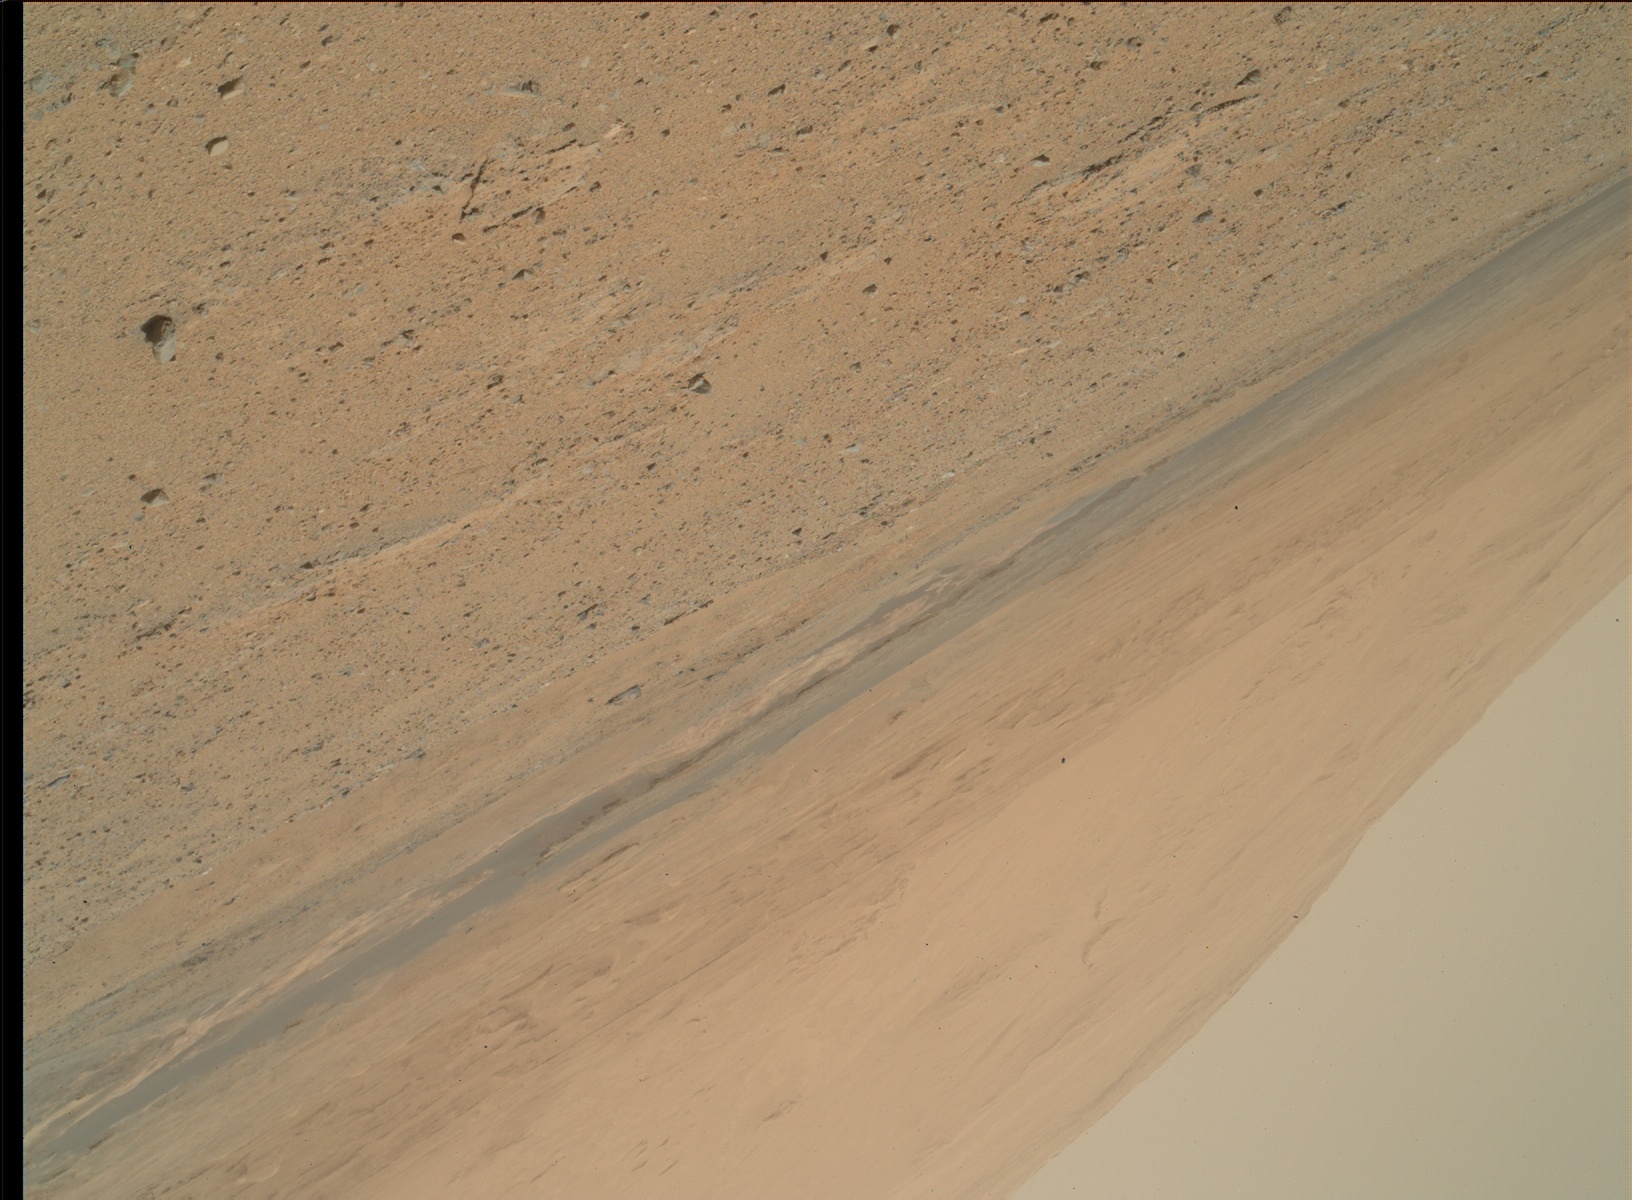 Nasa's Mars rover Curiosity acquired this image using its Mars Hand Lens Imager (MAHLI) on Sol 351